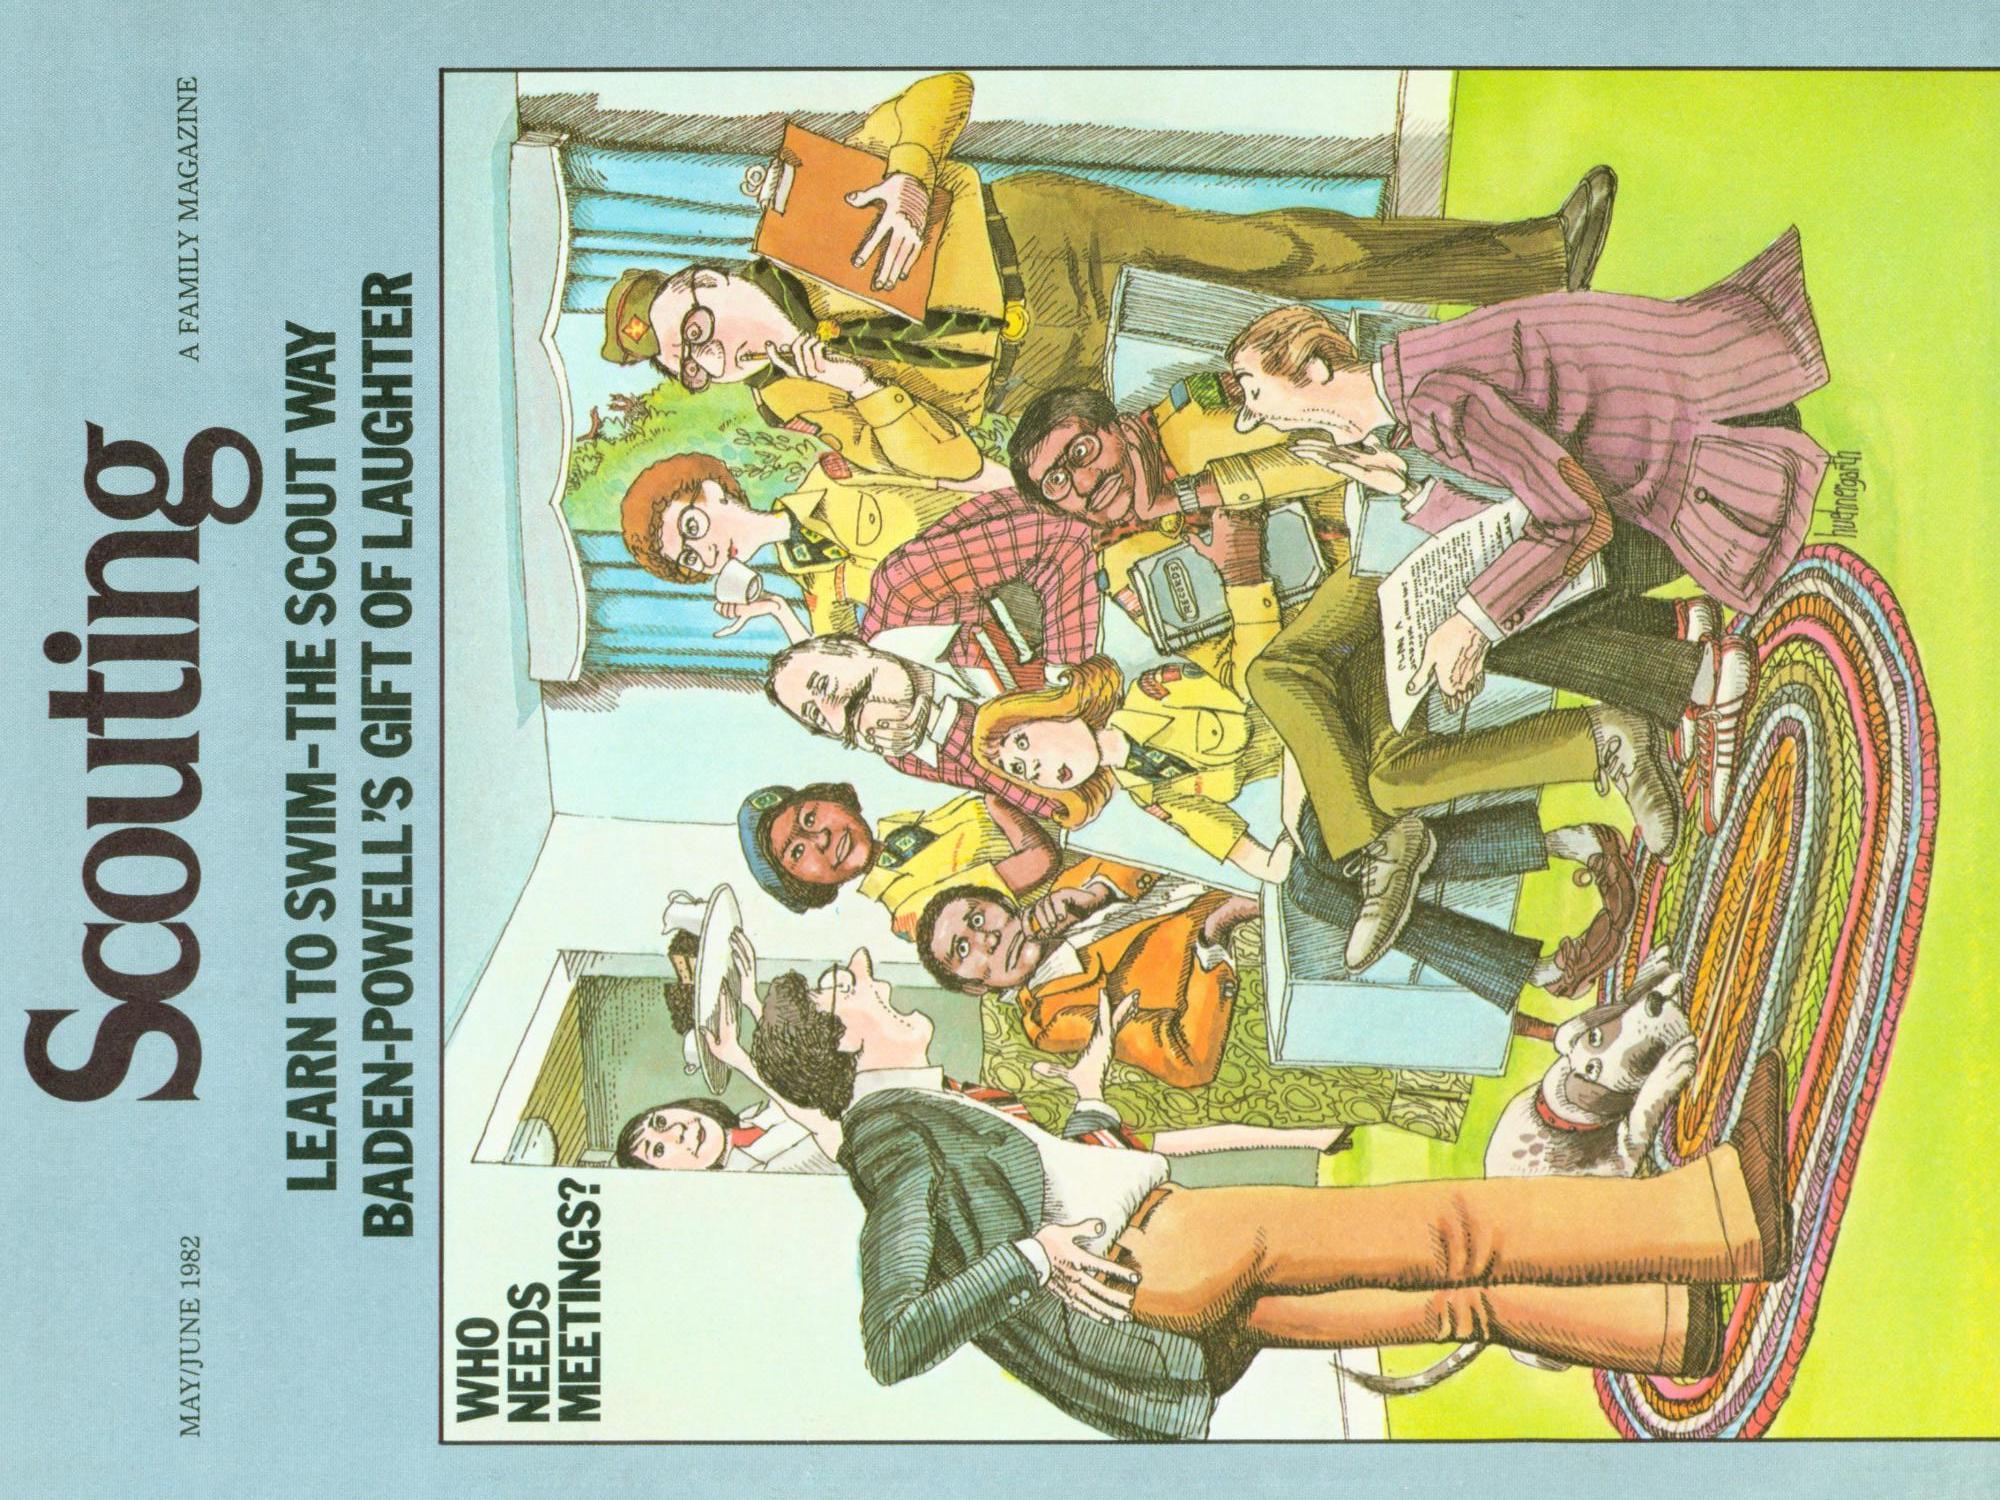 Scouting, Volume 70, Number 3, May-June 1982
                                                
                                                    Front Cover
                                                